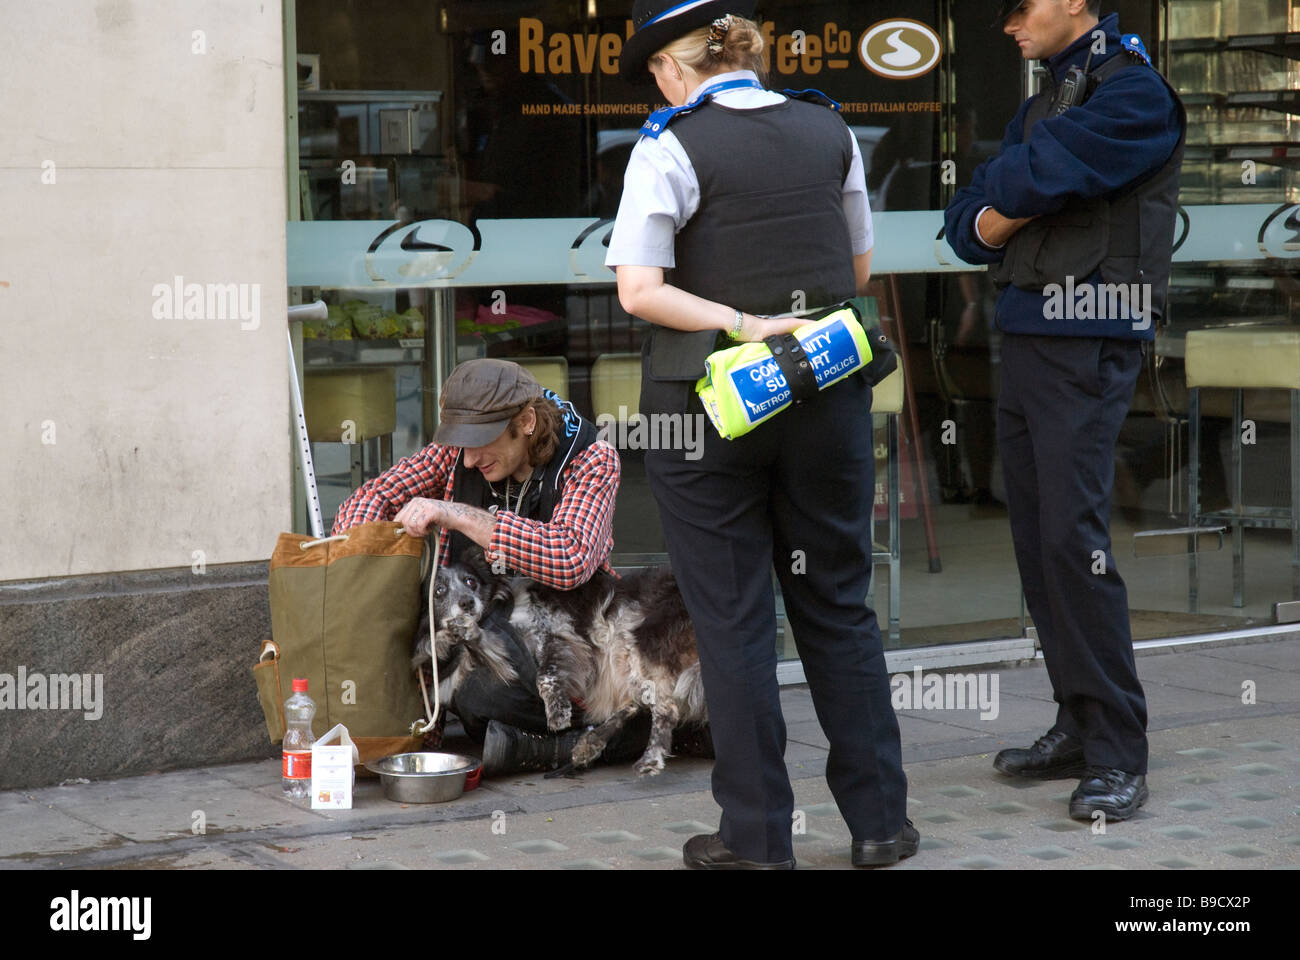 Homeless man and dog being questioned by community police Stock Photo